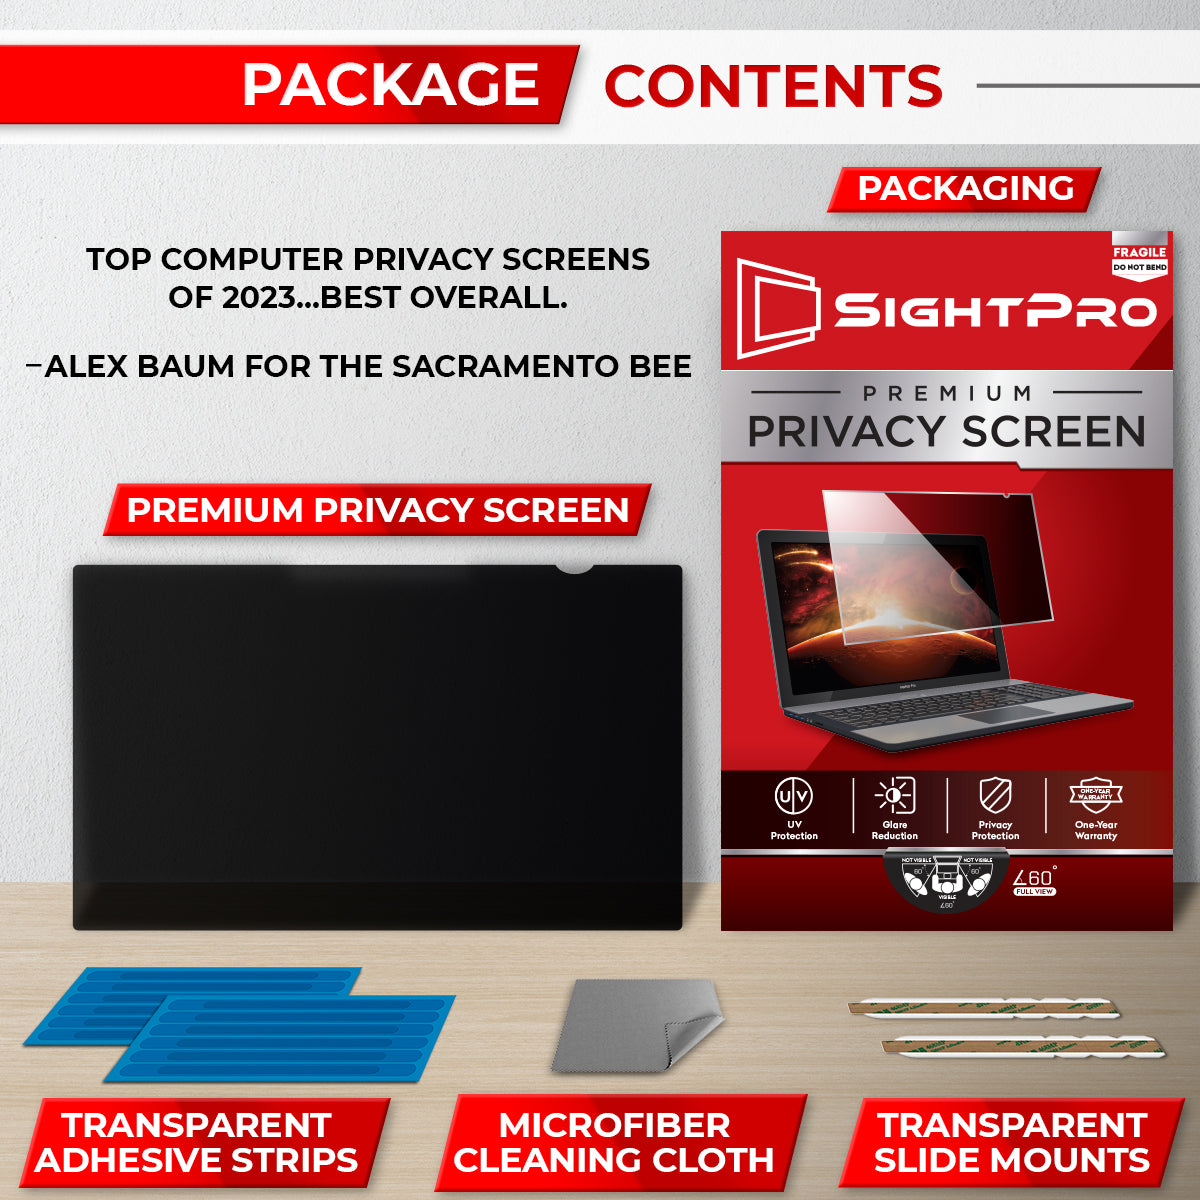 SightPro 14 Inch 16:9 Edge-to-Edge Privacy Screen Filter for Laptops